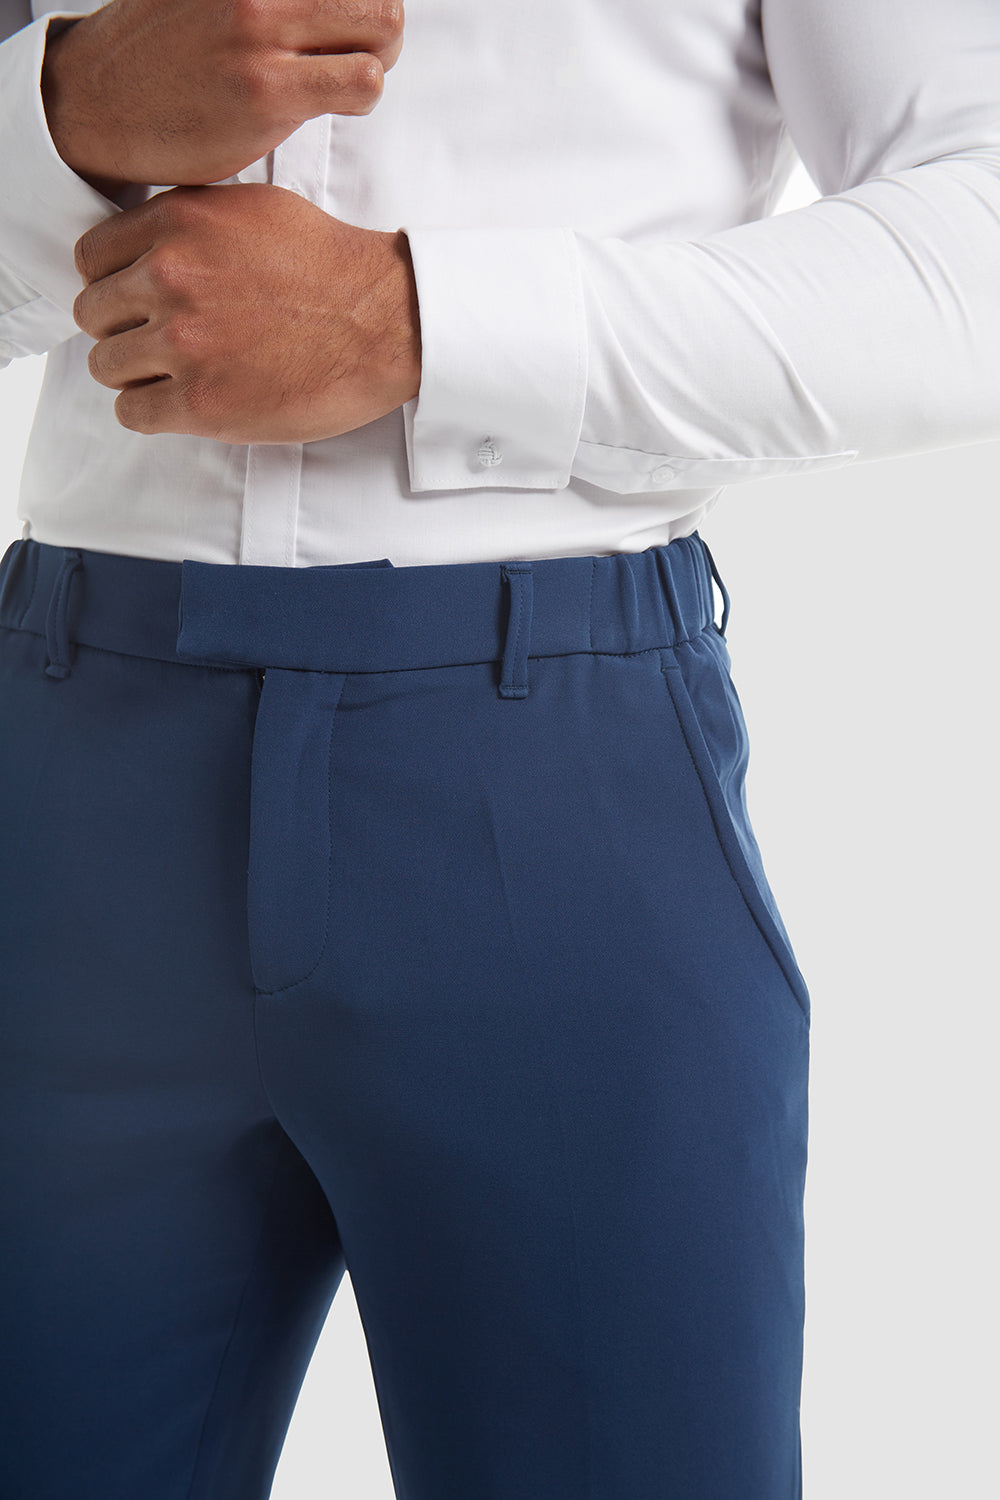 Tailored trousers Slim Fit - Navy blue - Men | H&M IN